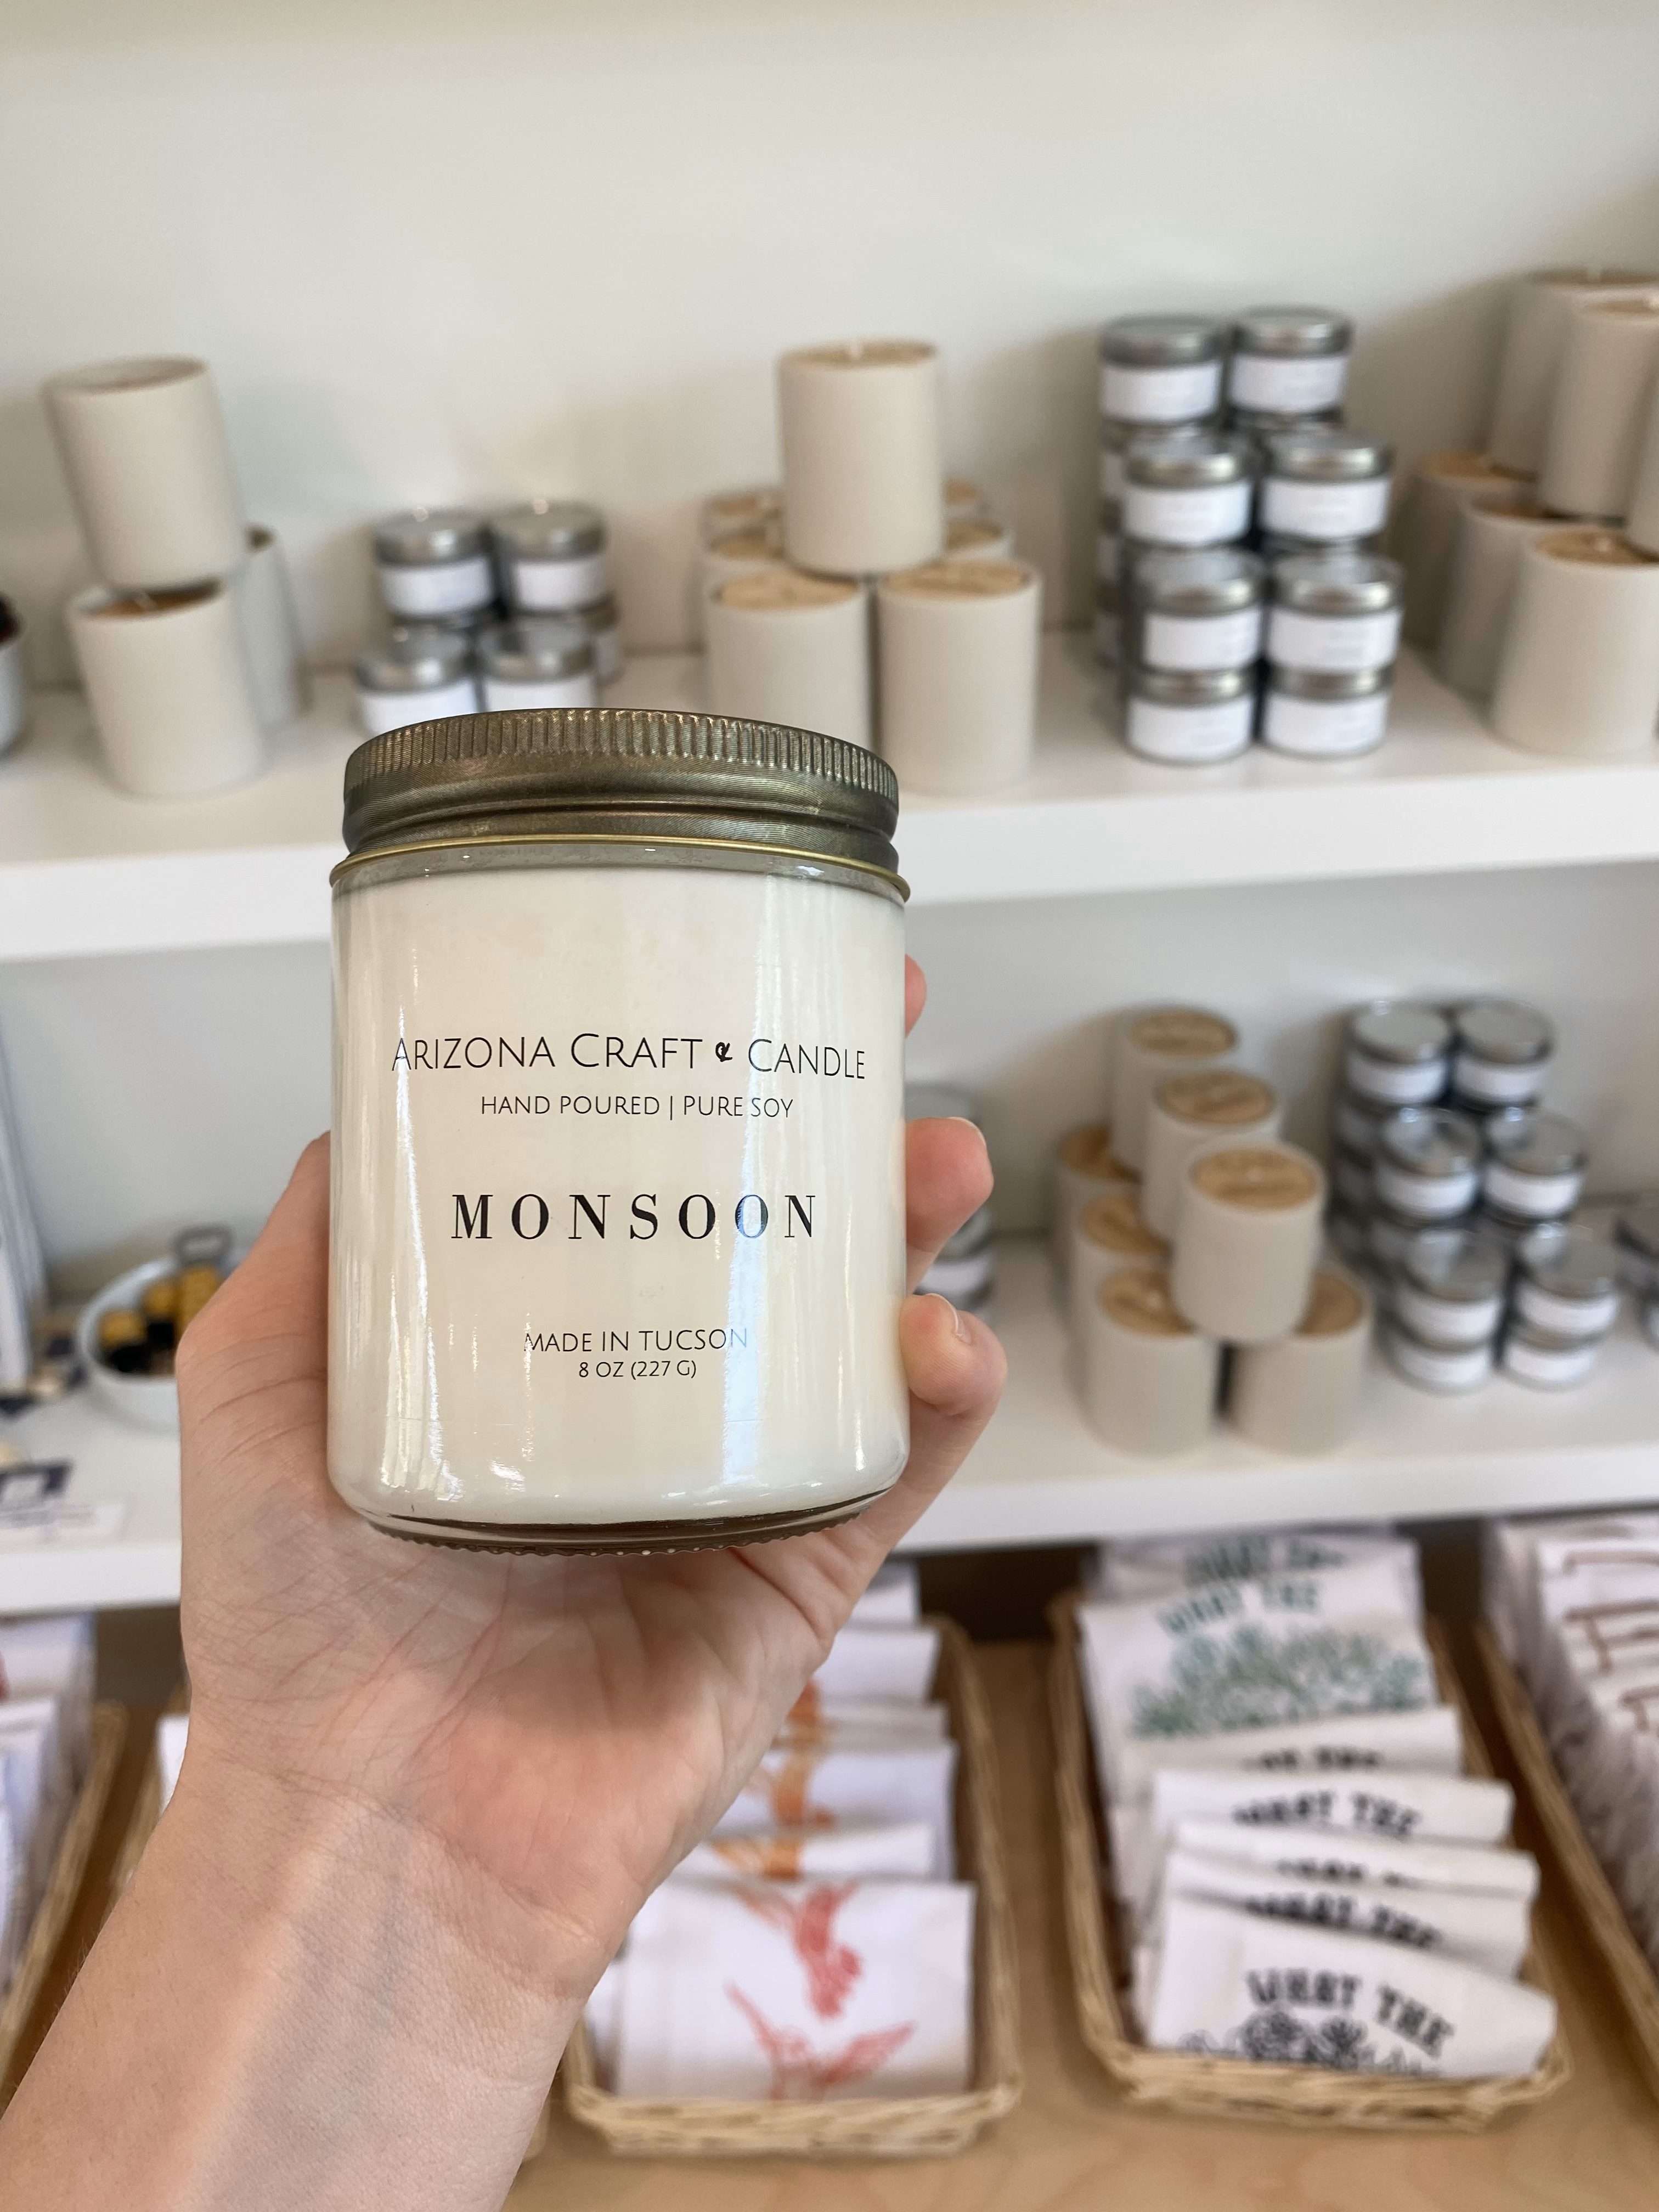 Monsoon candle being held in front of a shelf of other candles